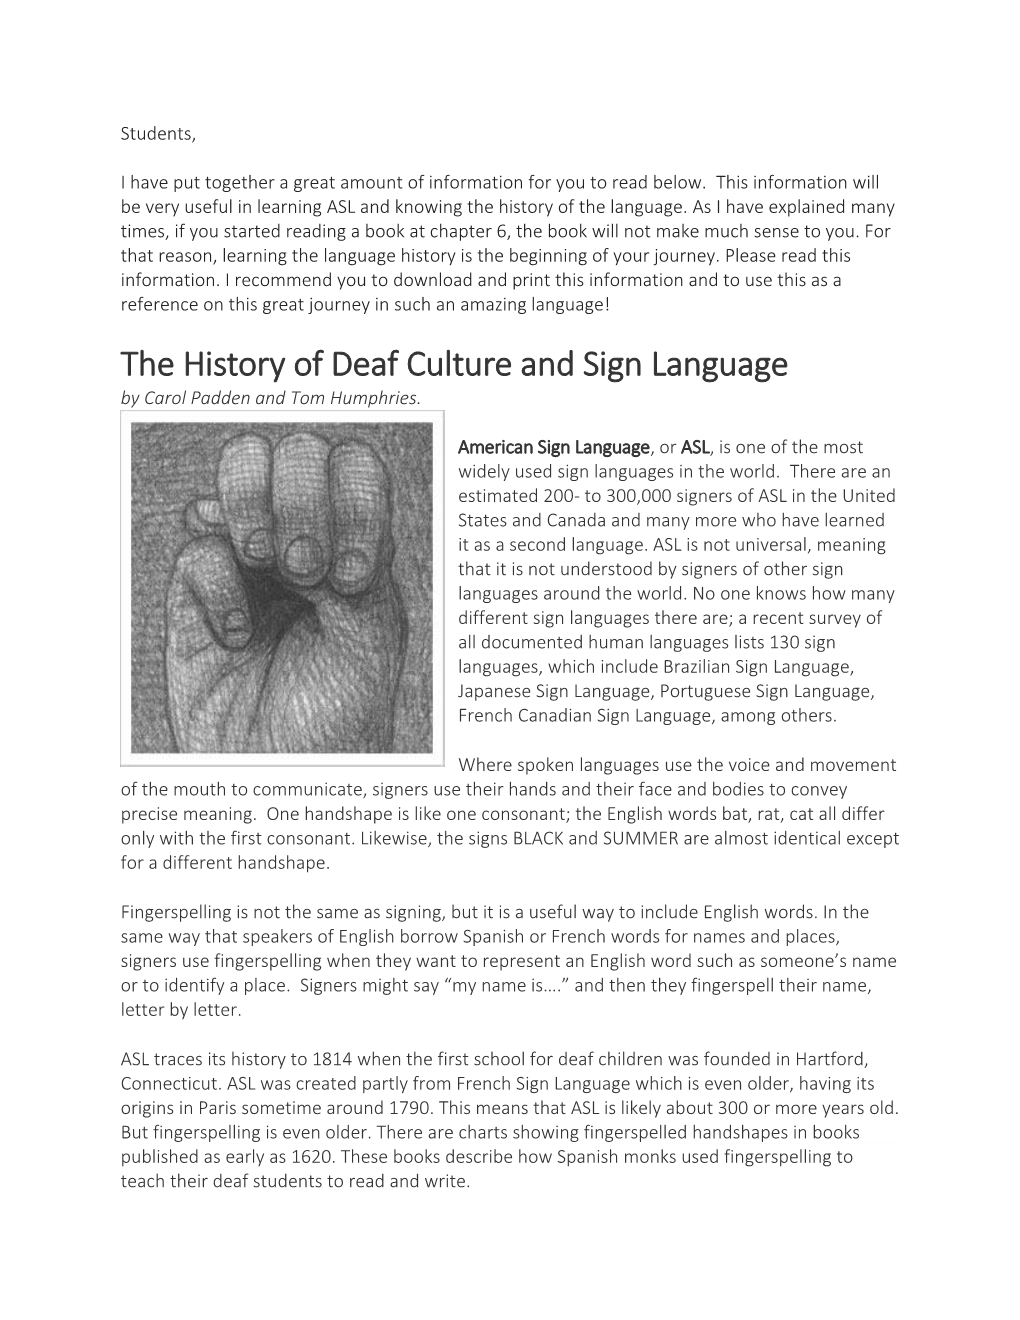 The History of Deaf Culture and Sign Language by Carol Padden and Tom Humphries